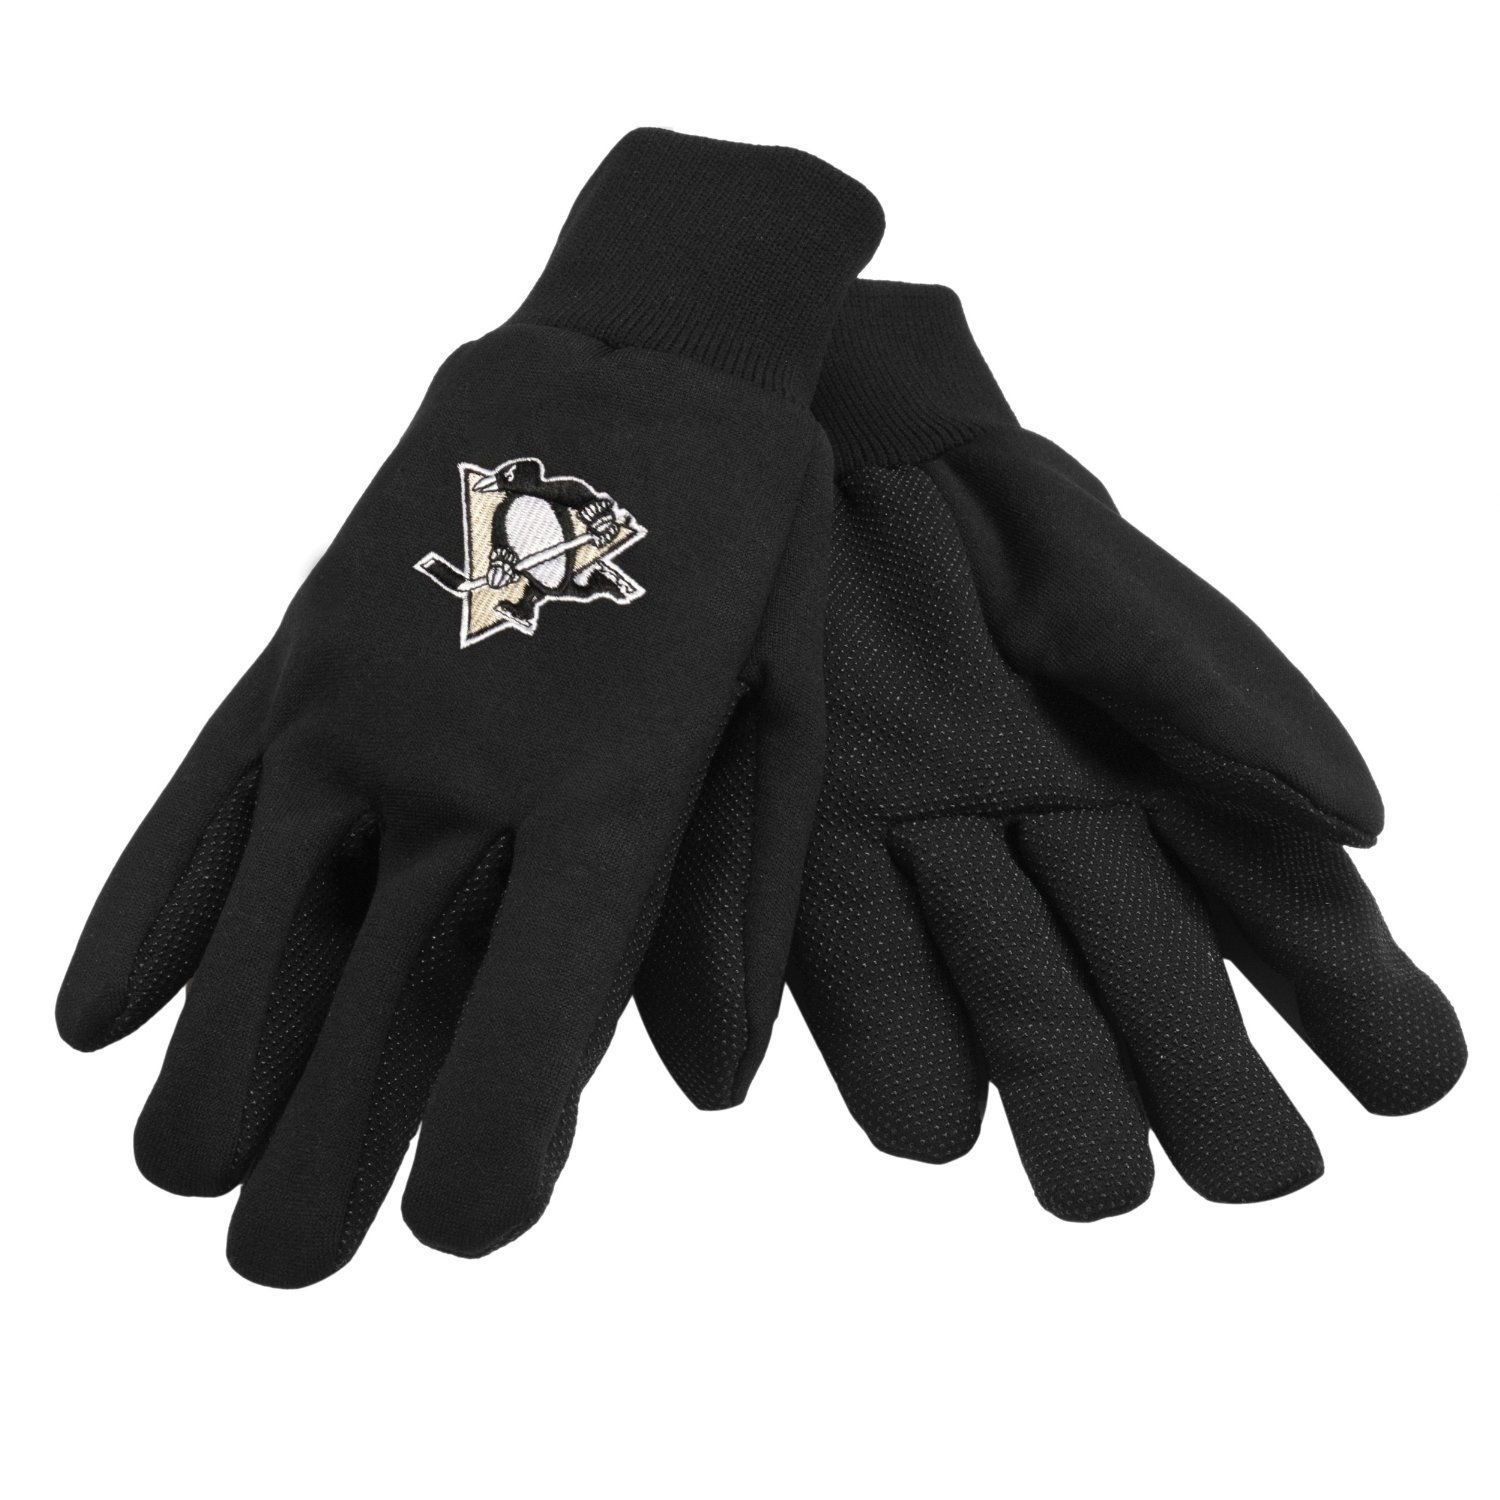 NHL Pittsburgh Penguins Colored Palm Utility Gloves Black w/ Black Palm by FOCO - $10.99